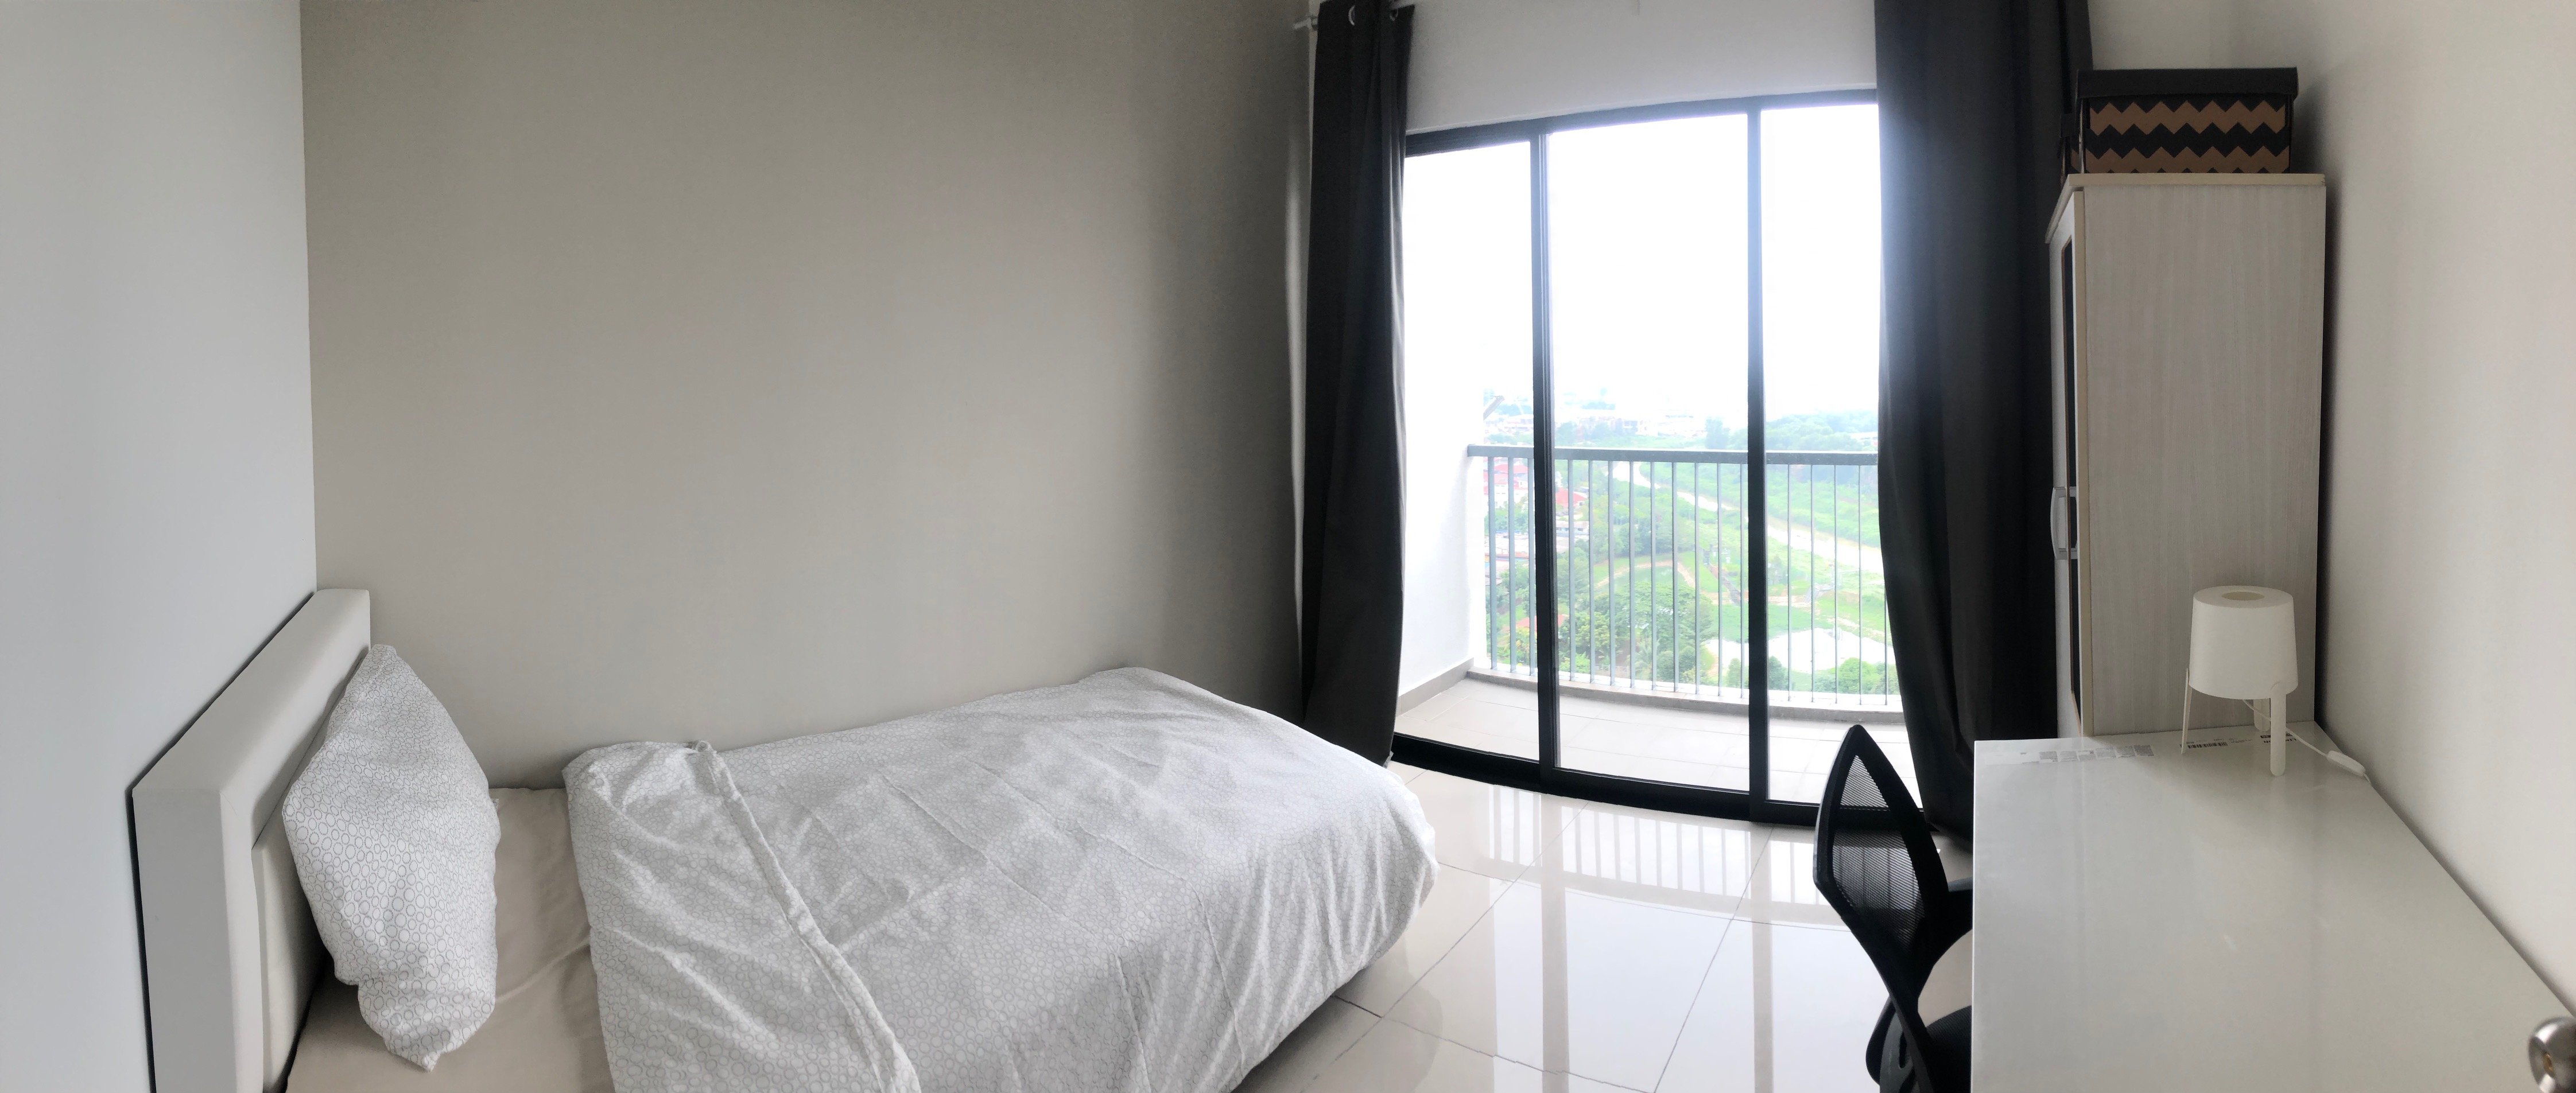 The Greens Shah Alam  Apartment For Rent At The Greens Subang West